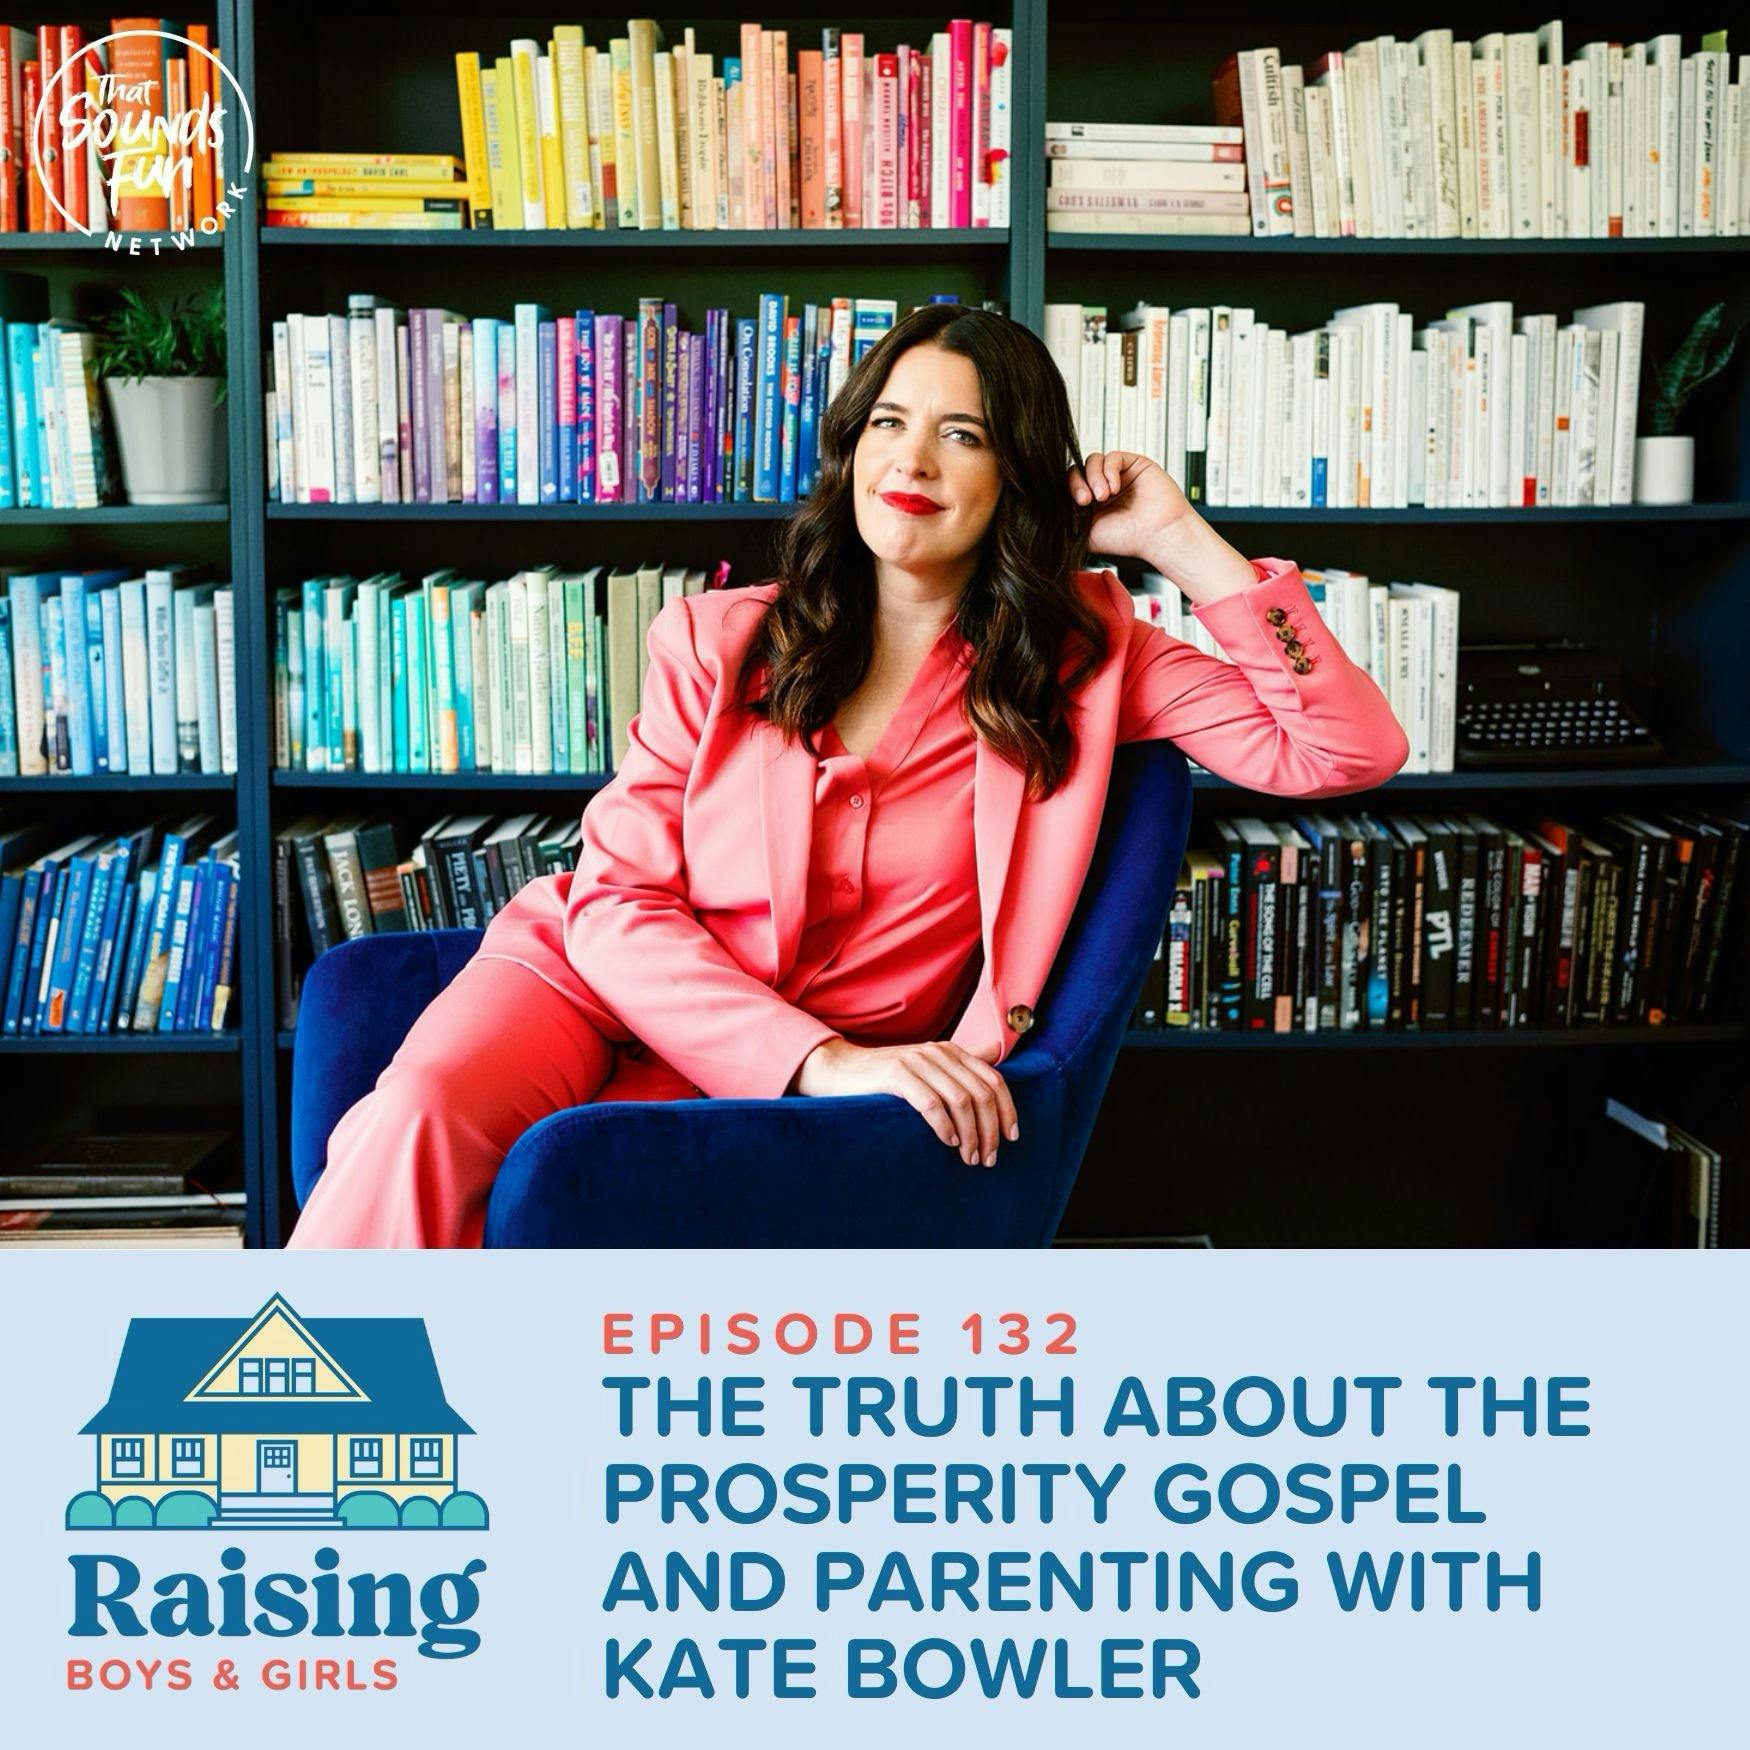 Episode 132: The Truth About the Prosperity Gospel and Parenting with Kate Bowler